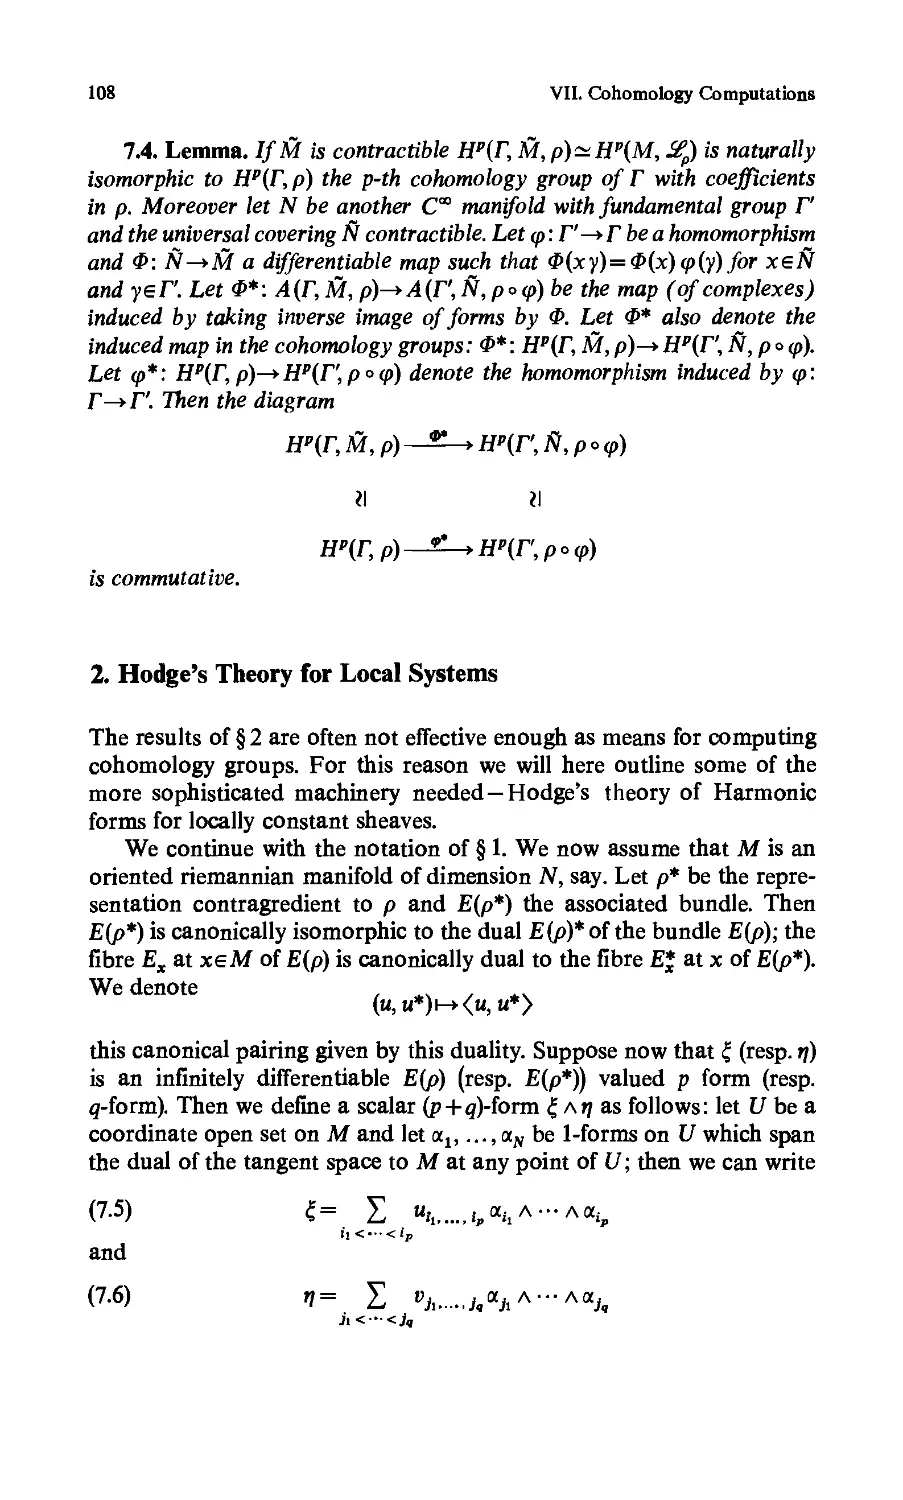 2. Hodge's Theory for Local Systems